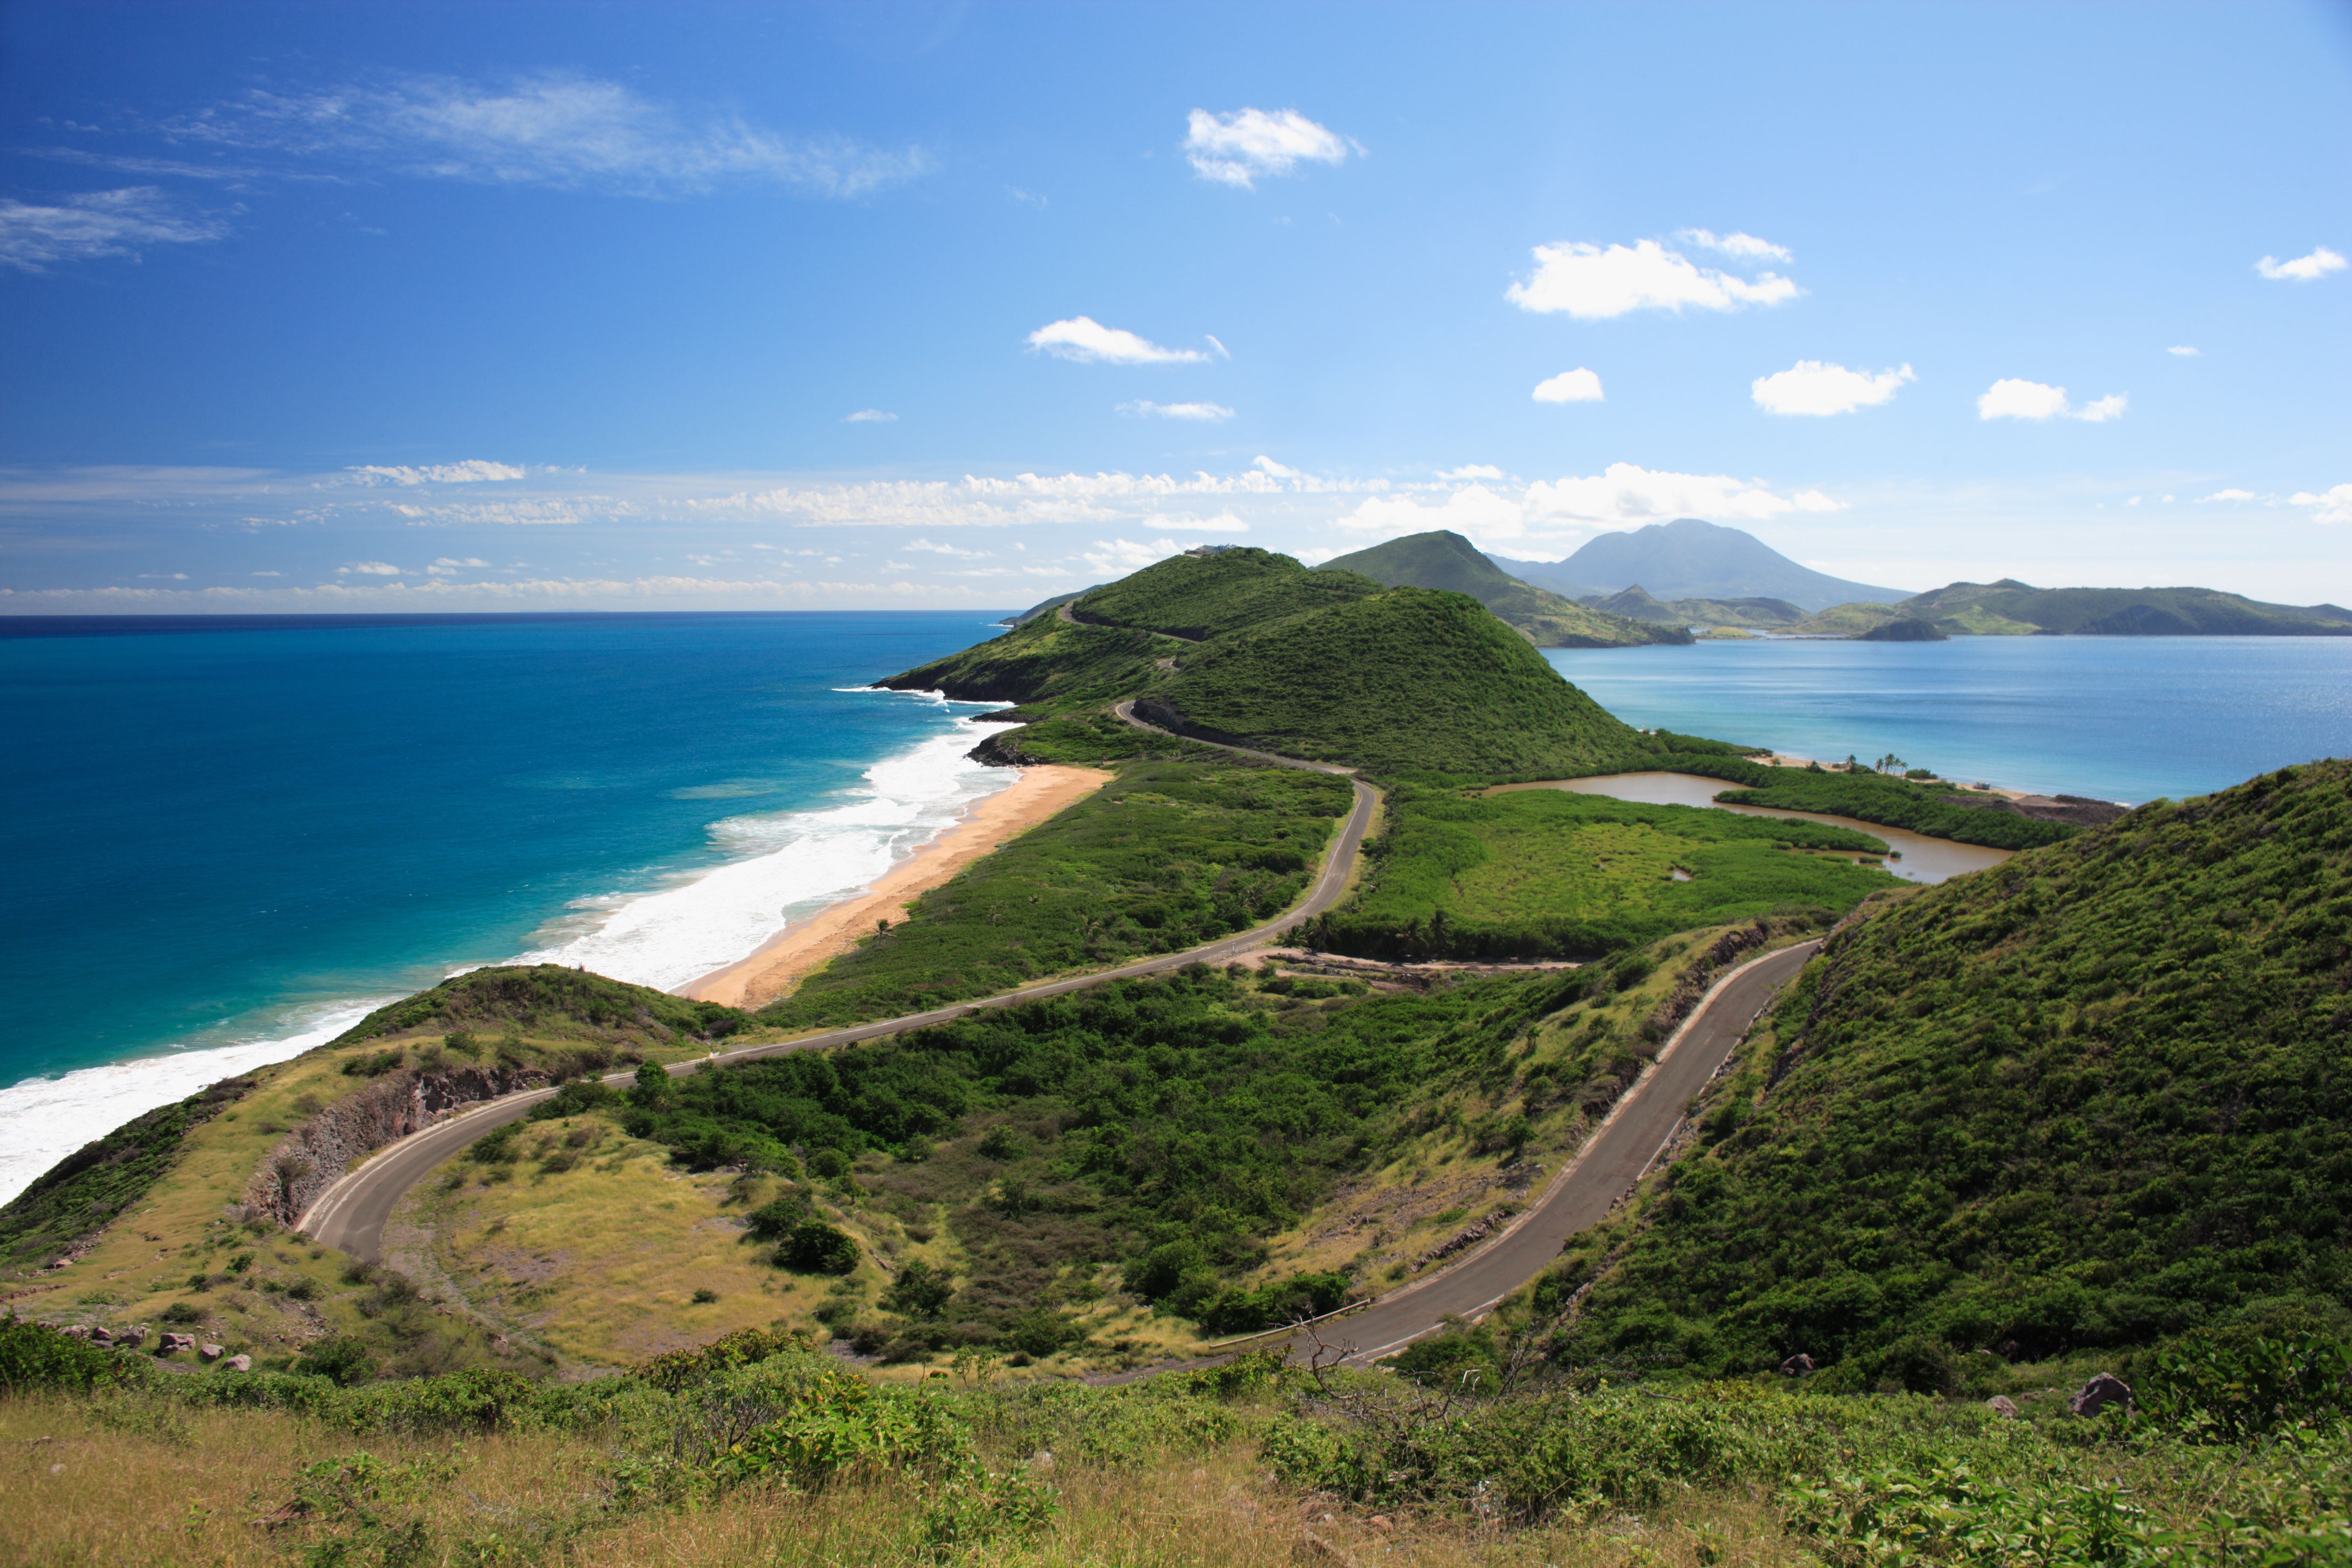 It’s beaches are undeniably stunning, but there’s more to St.Kitts than its captivating coastline